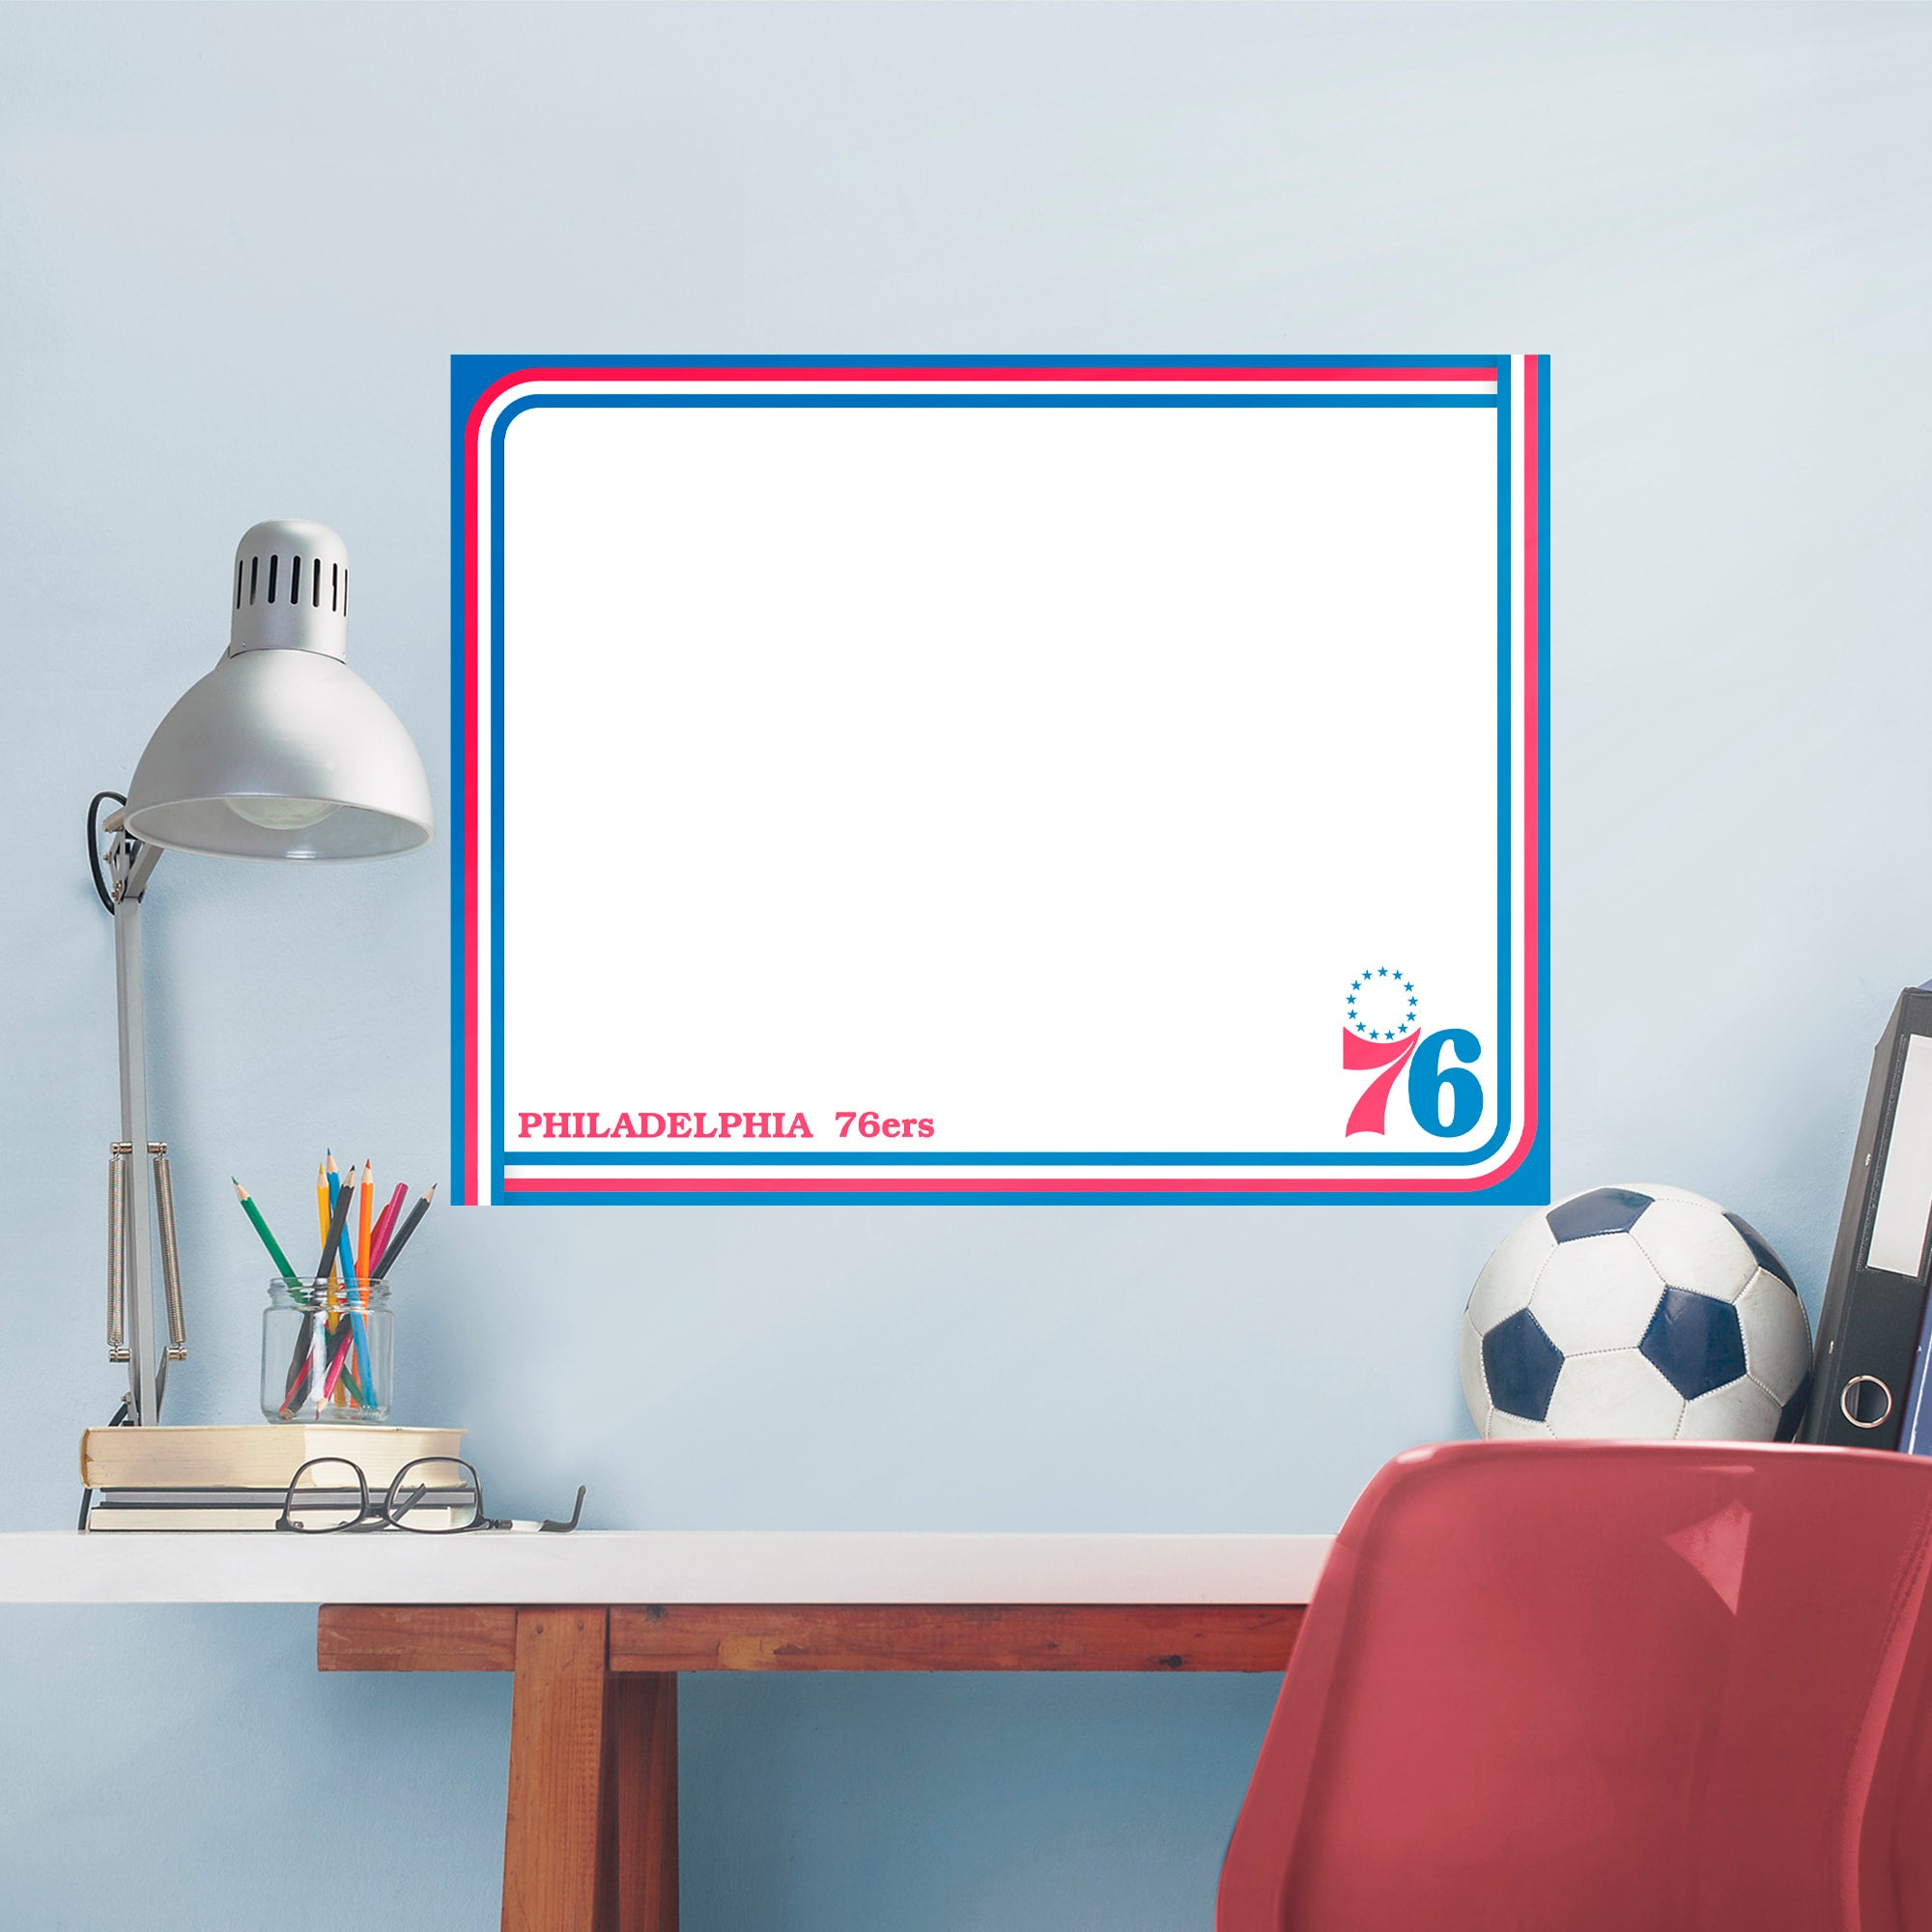 Philadelphia 76ers for Philadelphia 76ers: Dry Erase Whiteboard - Officially Licensed NBA Removable Wall Decal XL by Fathead | V